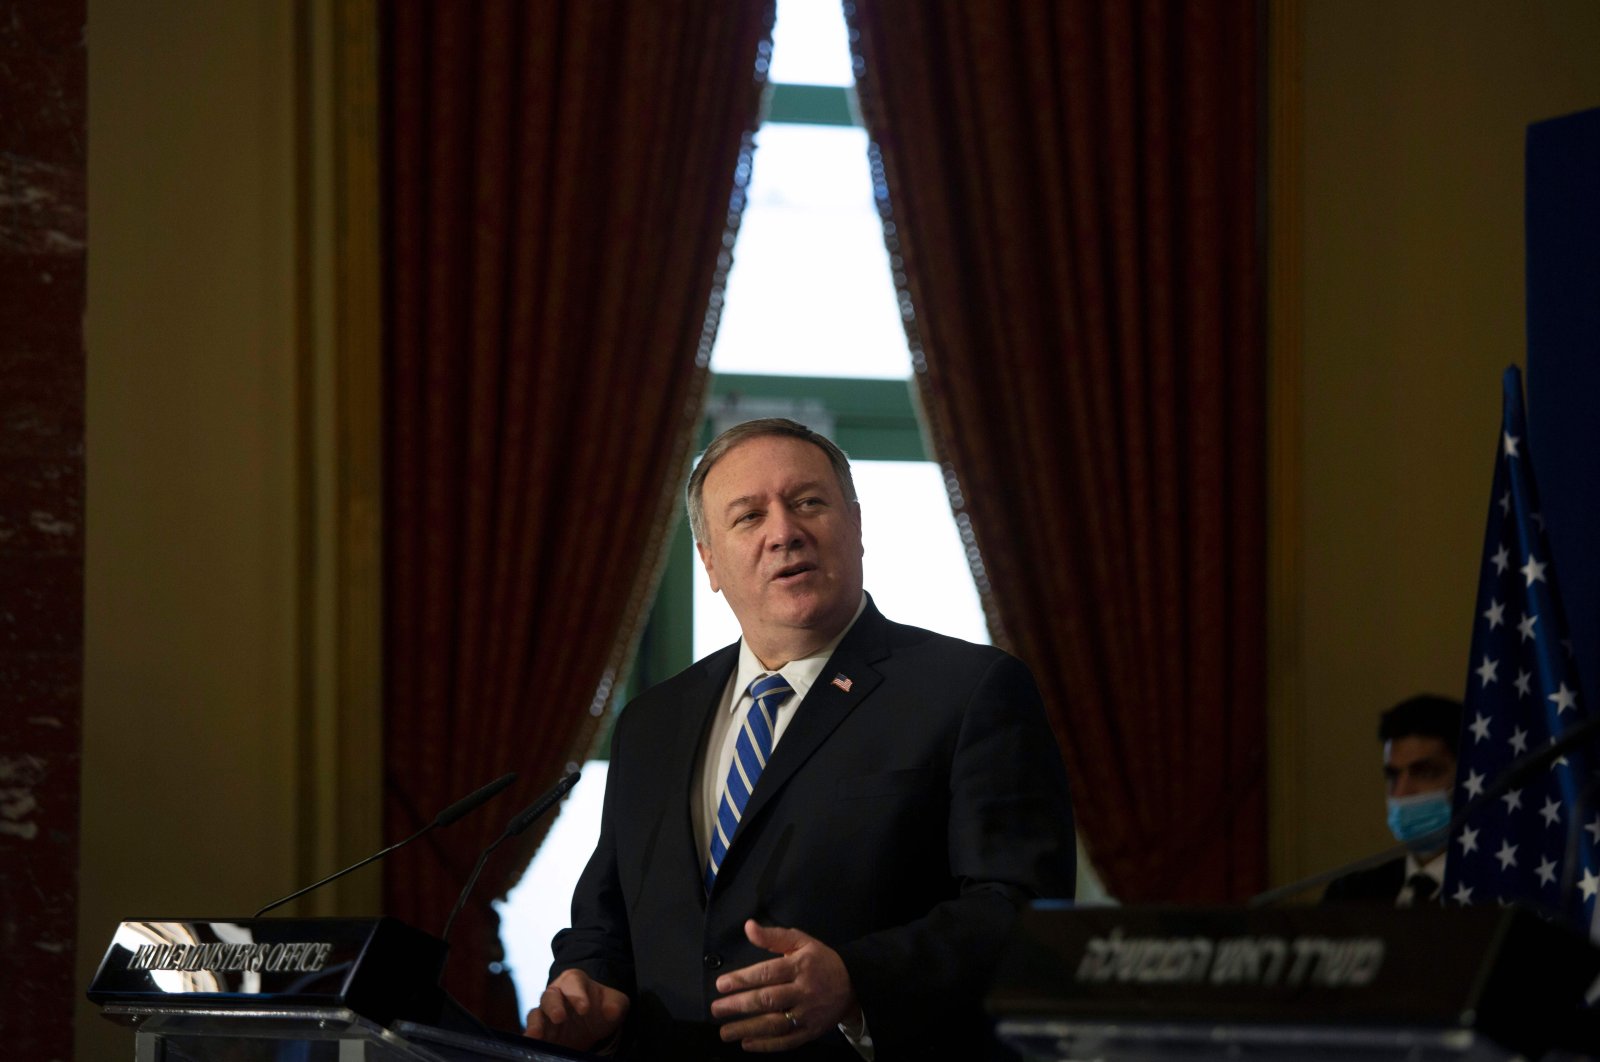 U.S. Secretary of State Mike Pompeo speaks during a joint press conference with the Israeli prime minister after a meeting in Jerusalem on November 19, 2020. (AFP Photo)